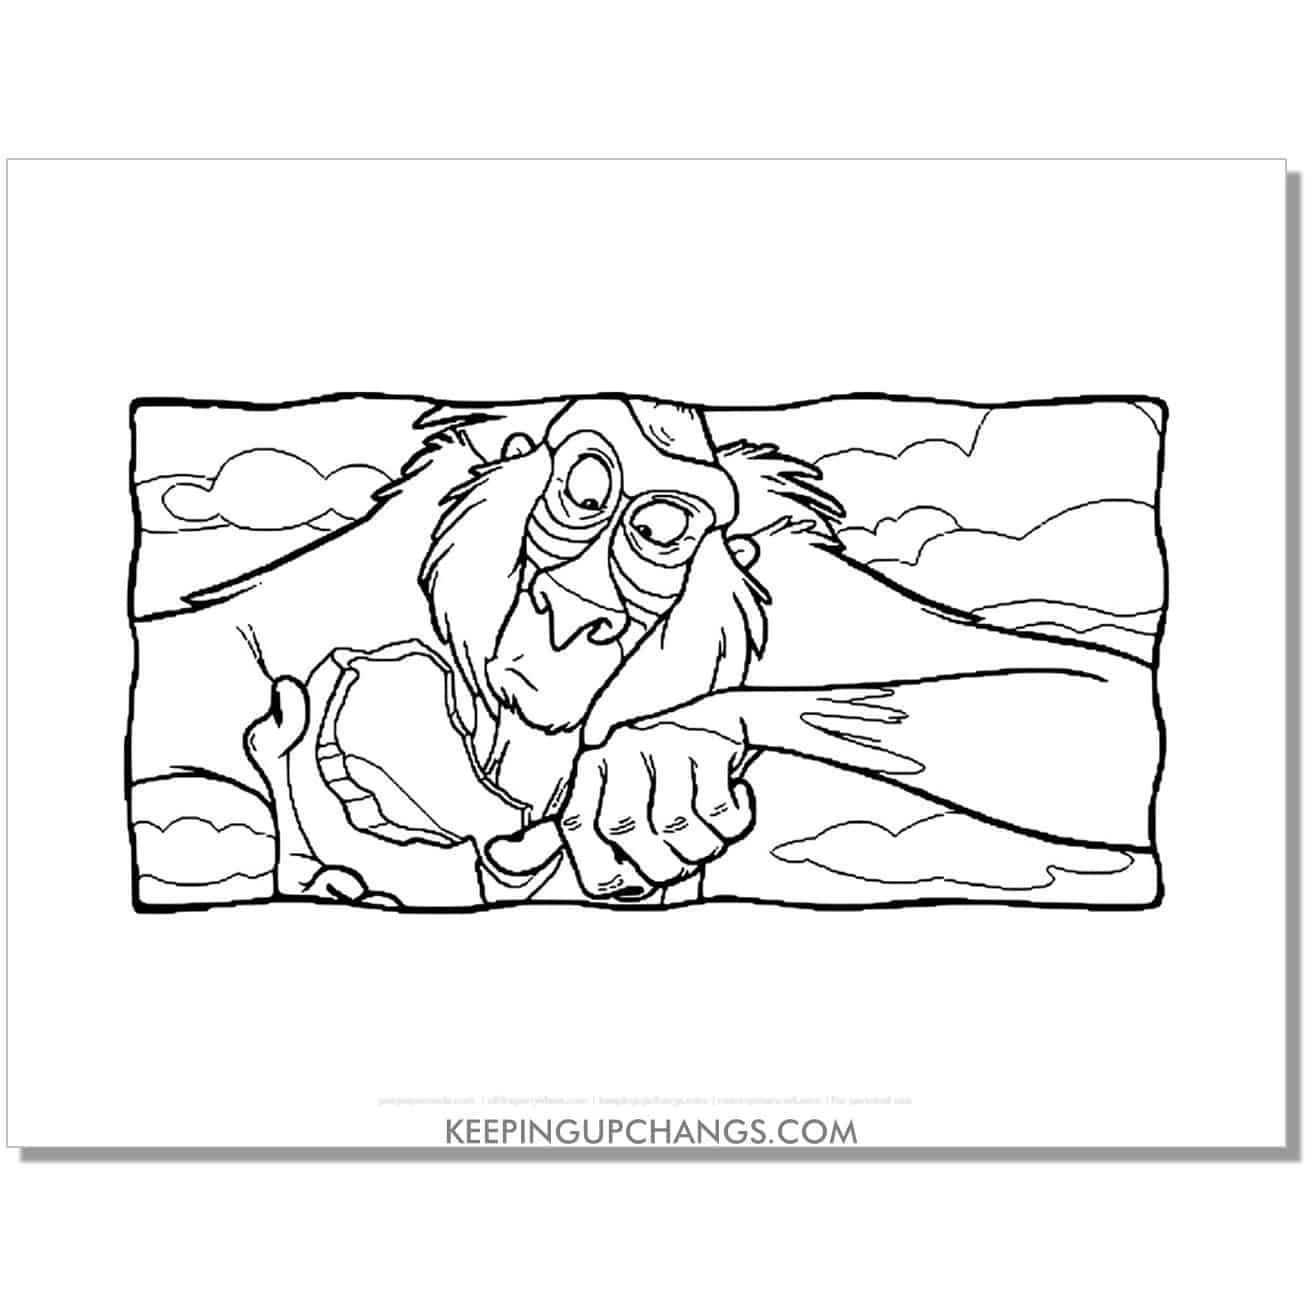 rafiki reaches in coconut lion king coloring page, sheet.